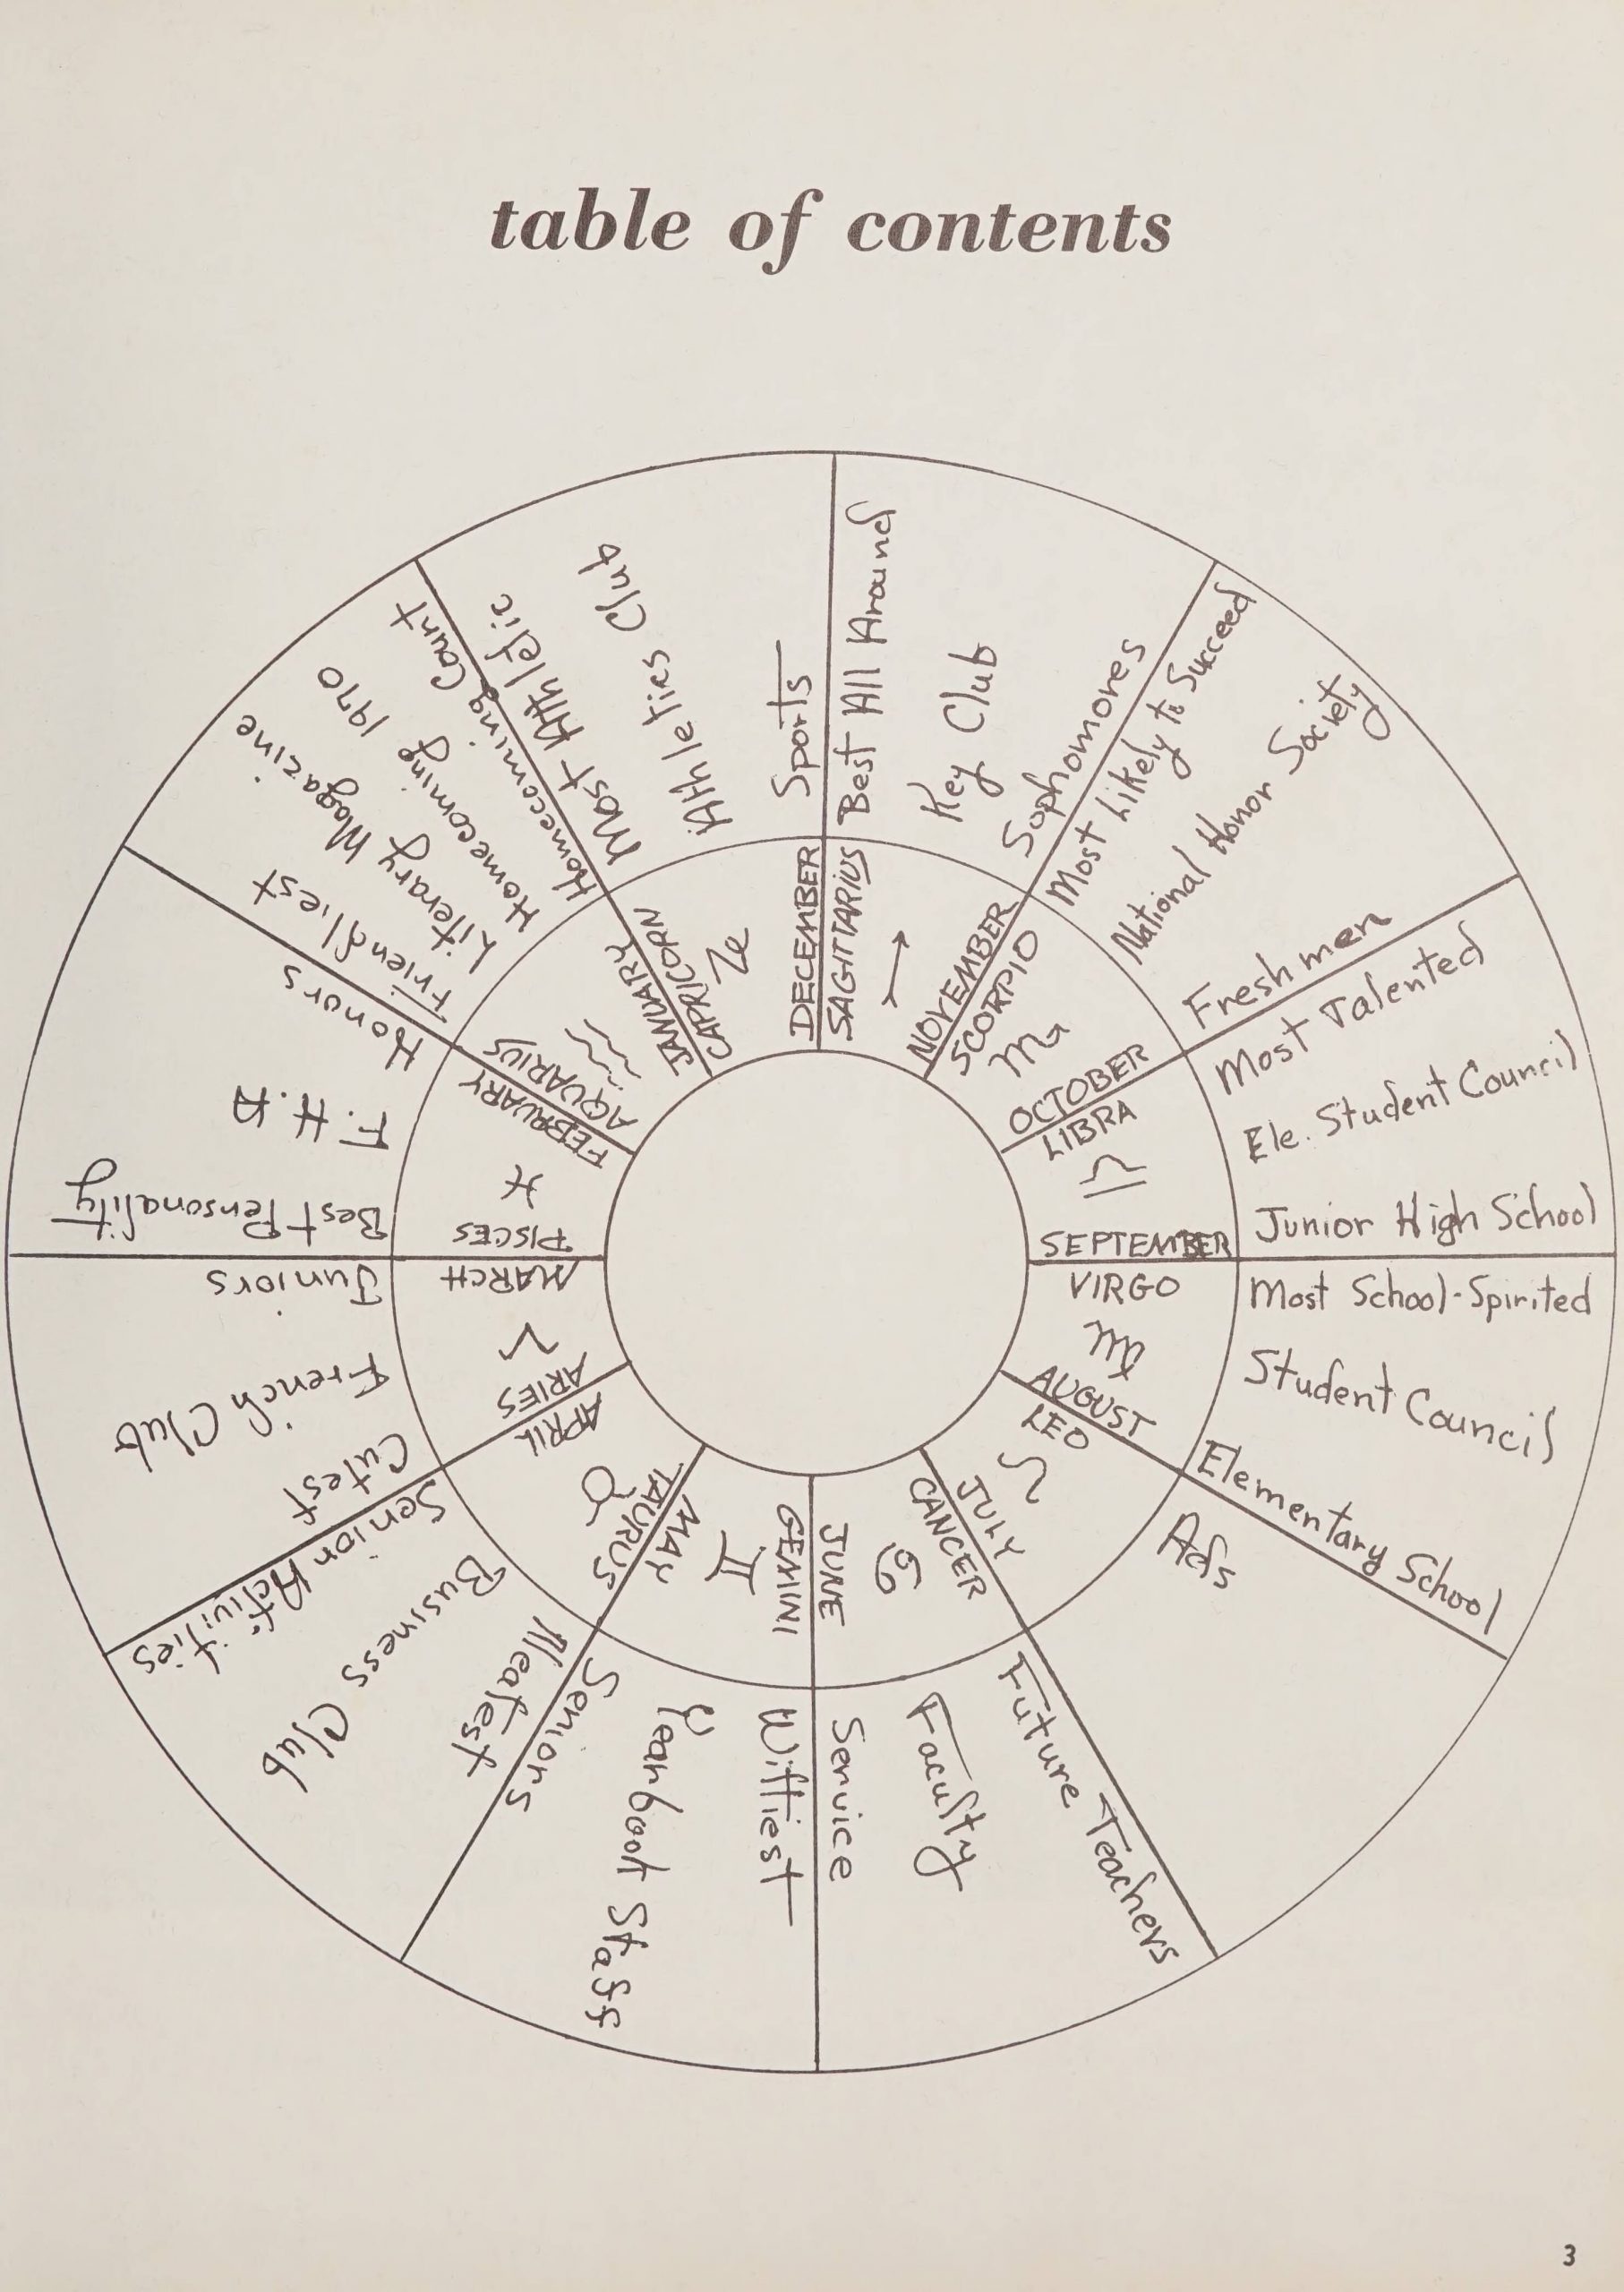 The yearbook's table of contents. A circle split into twelve sections for the Western zodiacs. Each section of the zodiac tells you where you can find certain content in the book.